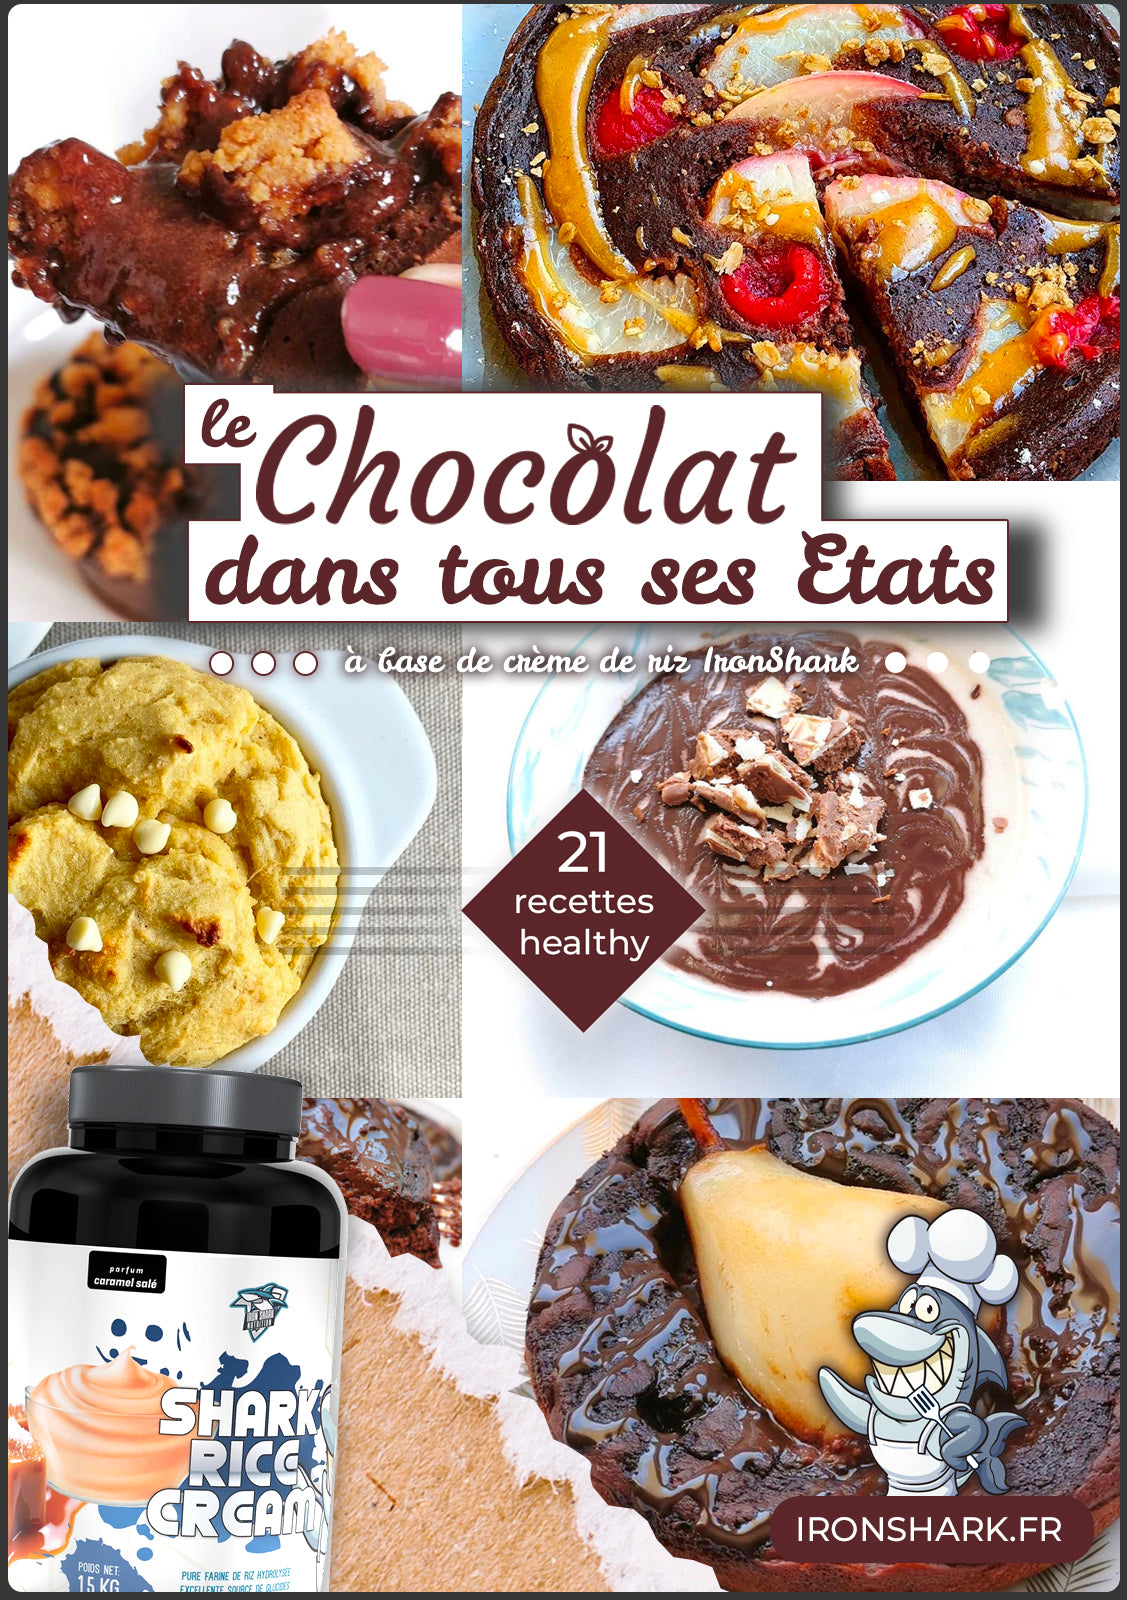 Ebook: Chocolate in all its states